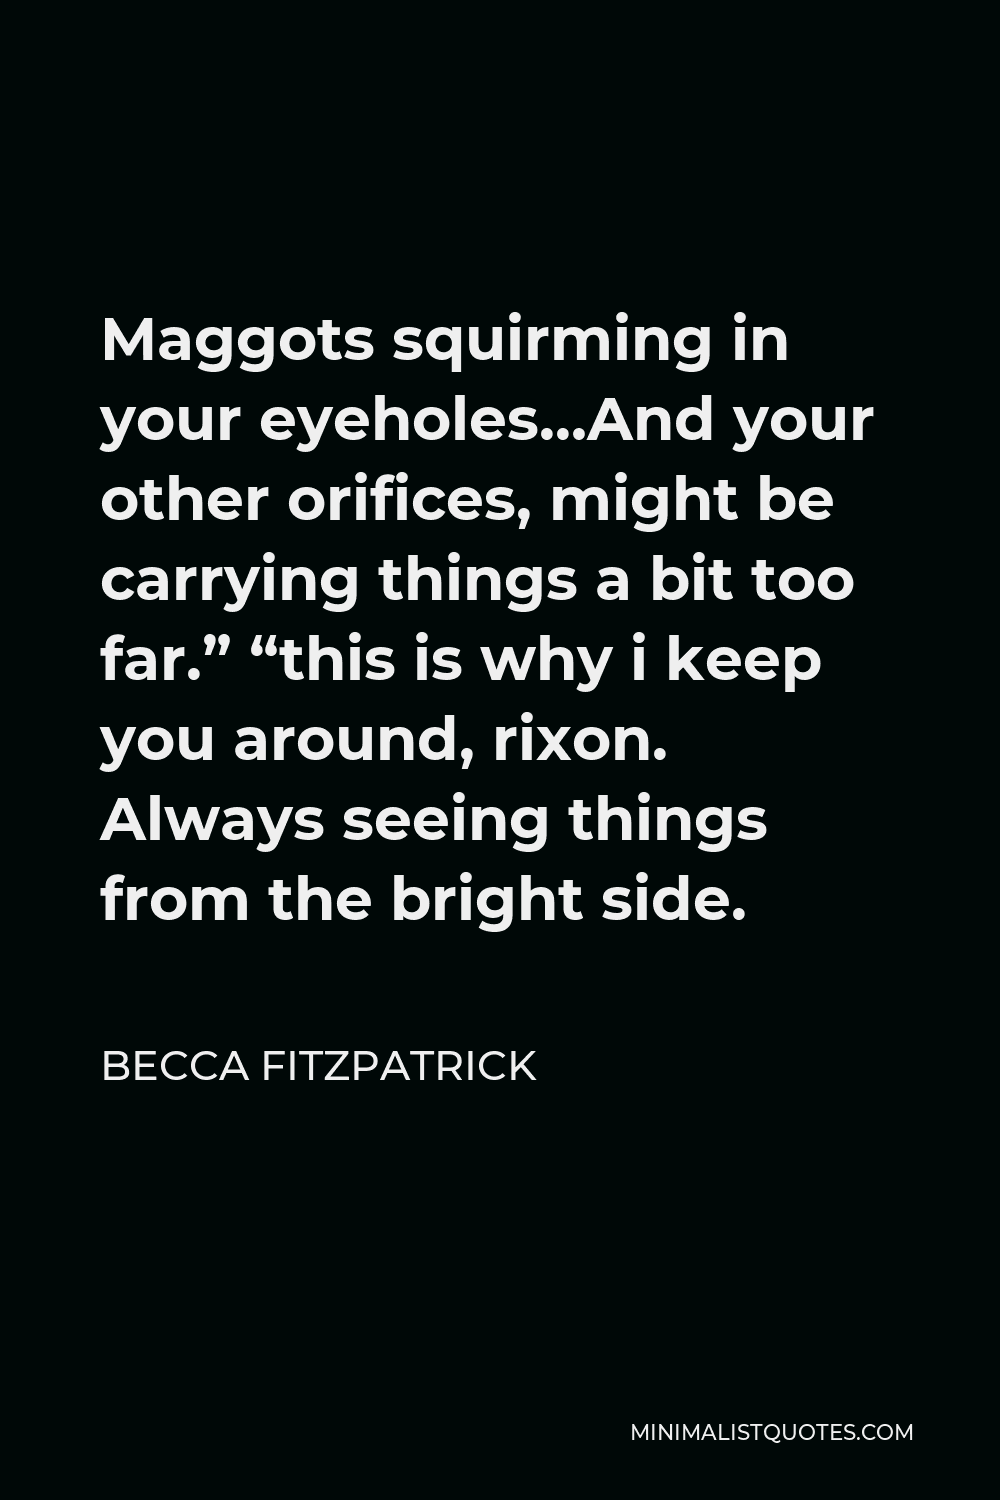 Becca Fitzpatrick Quote - Maggots squirming in your eyeholes…And your other orifices, might be carrying things a bit too far.” “this is why i keep you around, rixon. Always seeing things from the bright side.